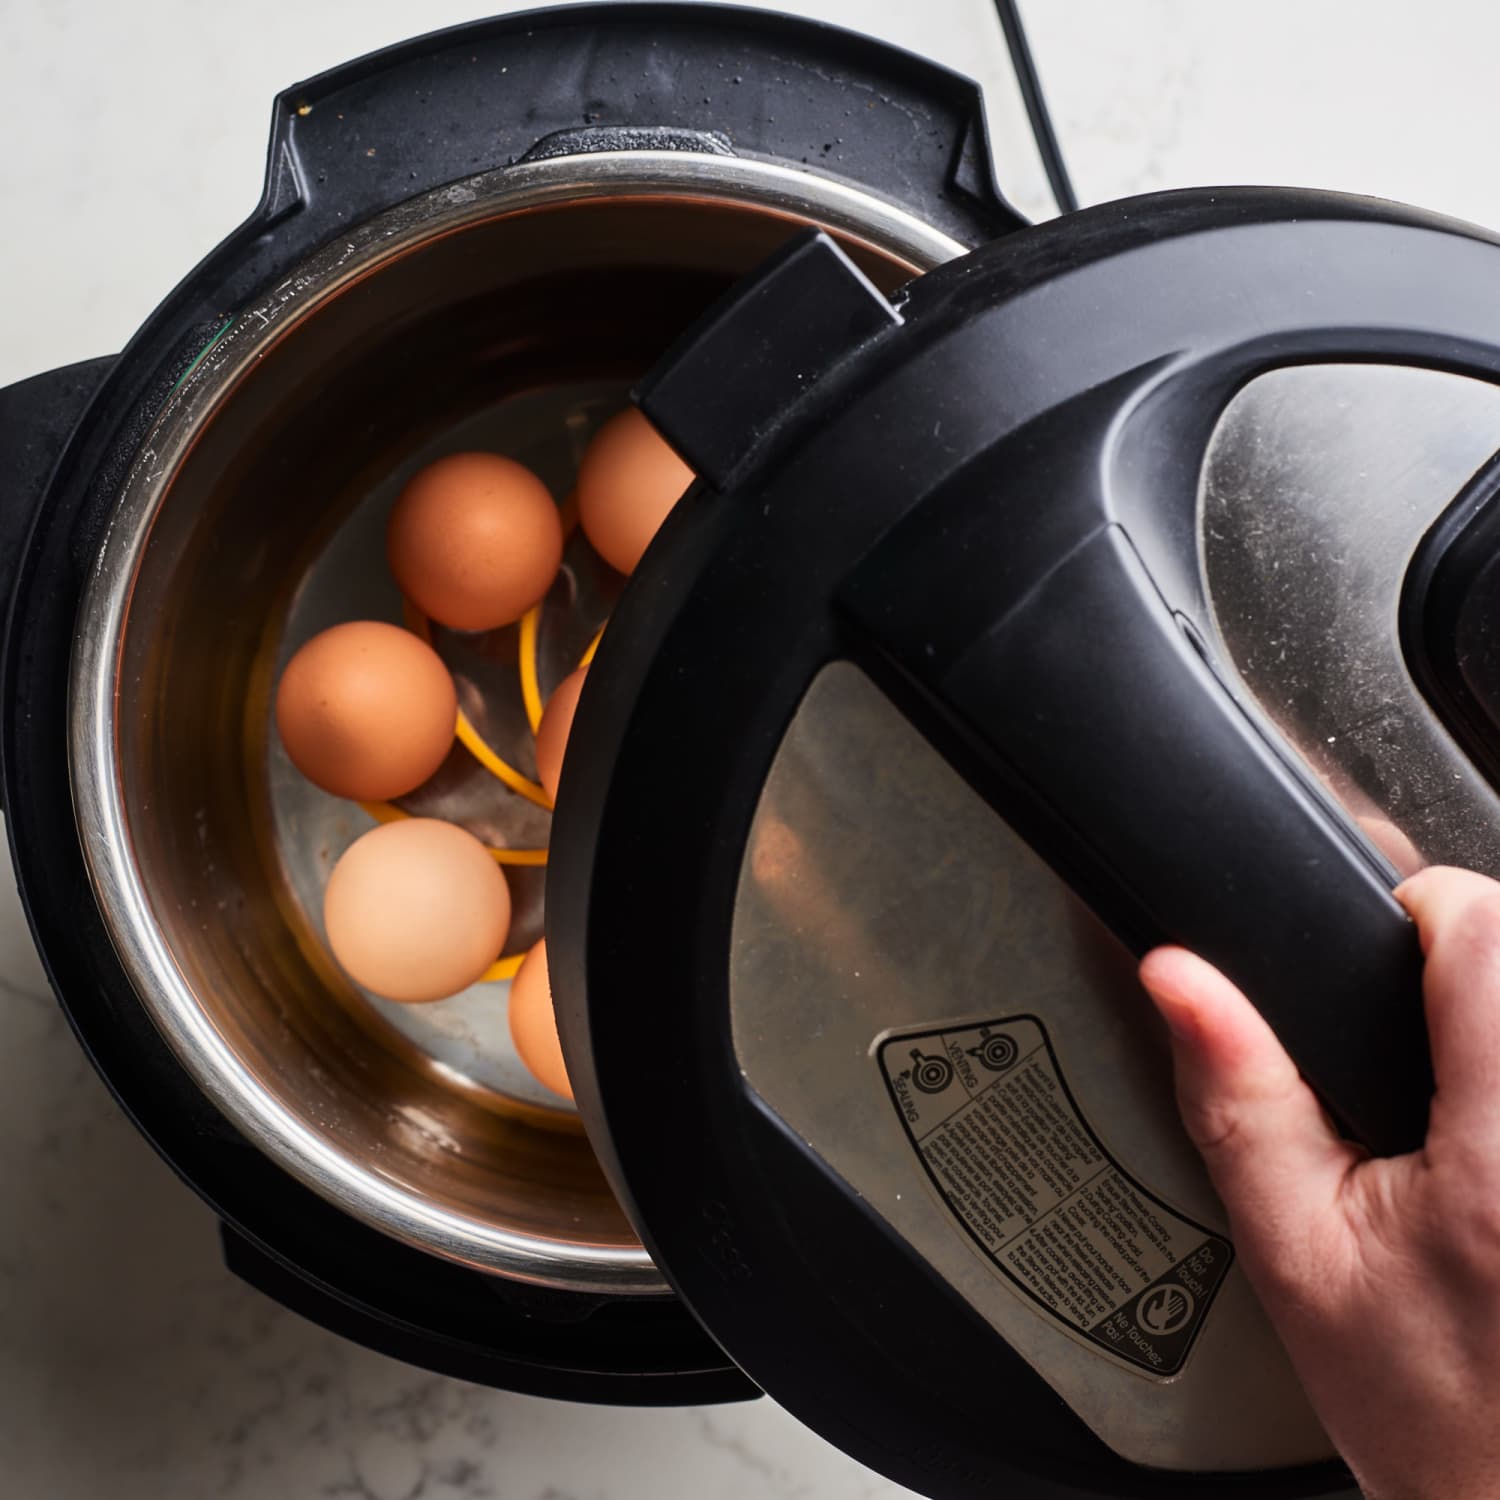 OXO Good Grips Pressure Cooker Sling: A Must-Have Accessory